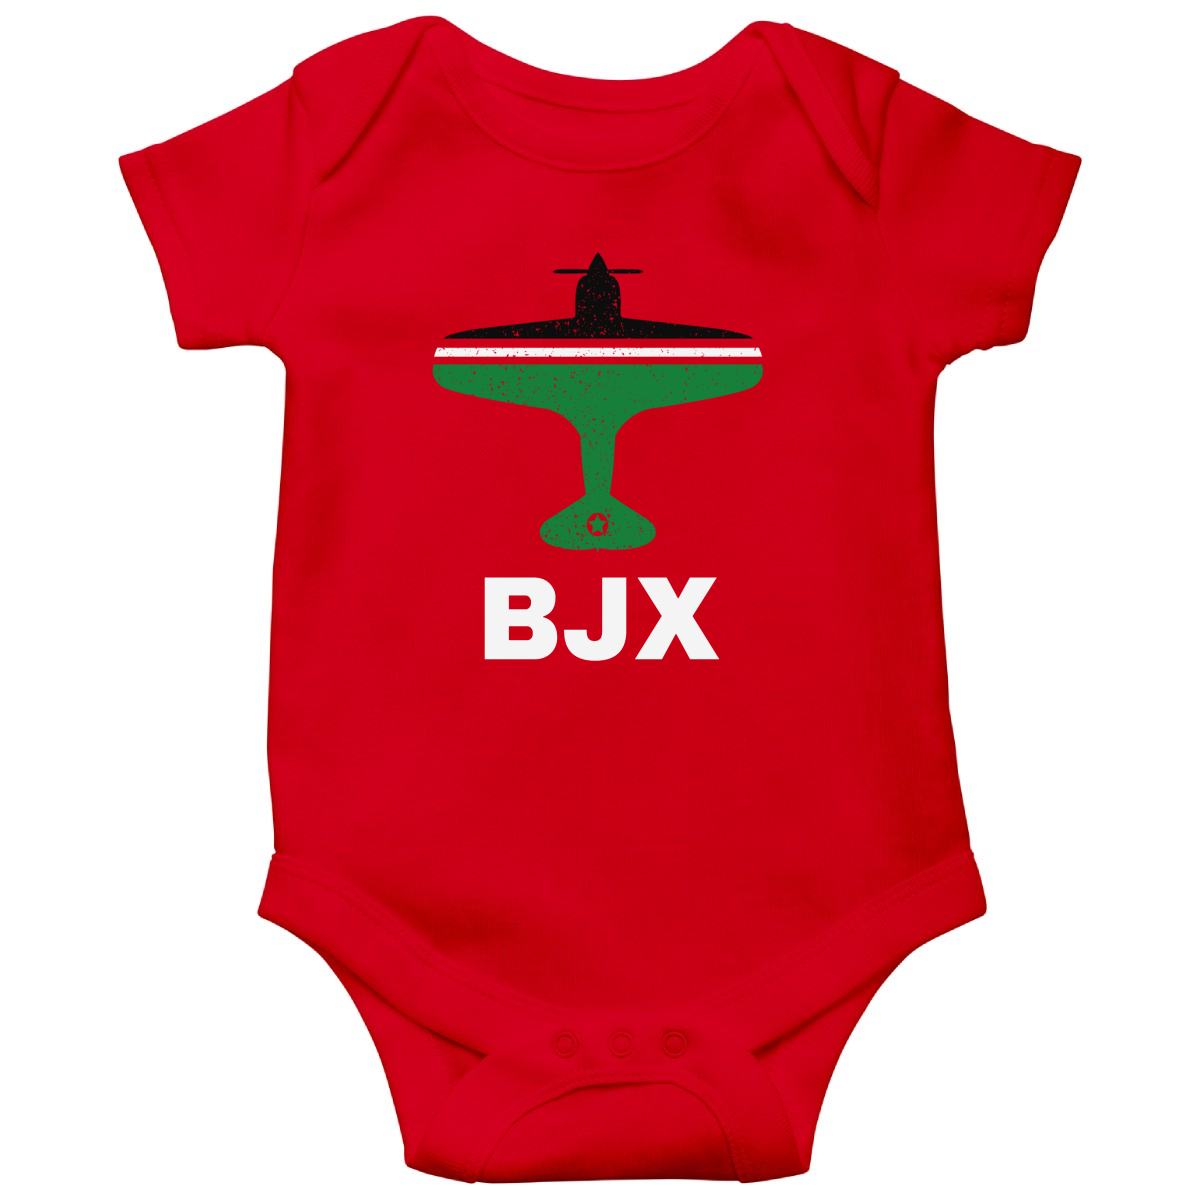 FLY Guanajuato BJX Airport Baby Bodysuits | Red